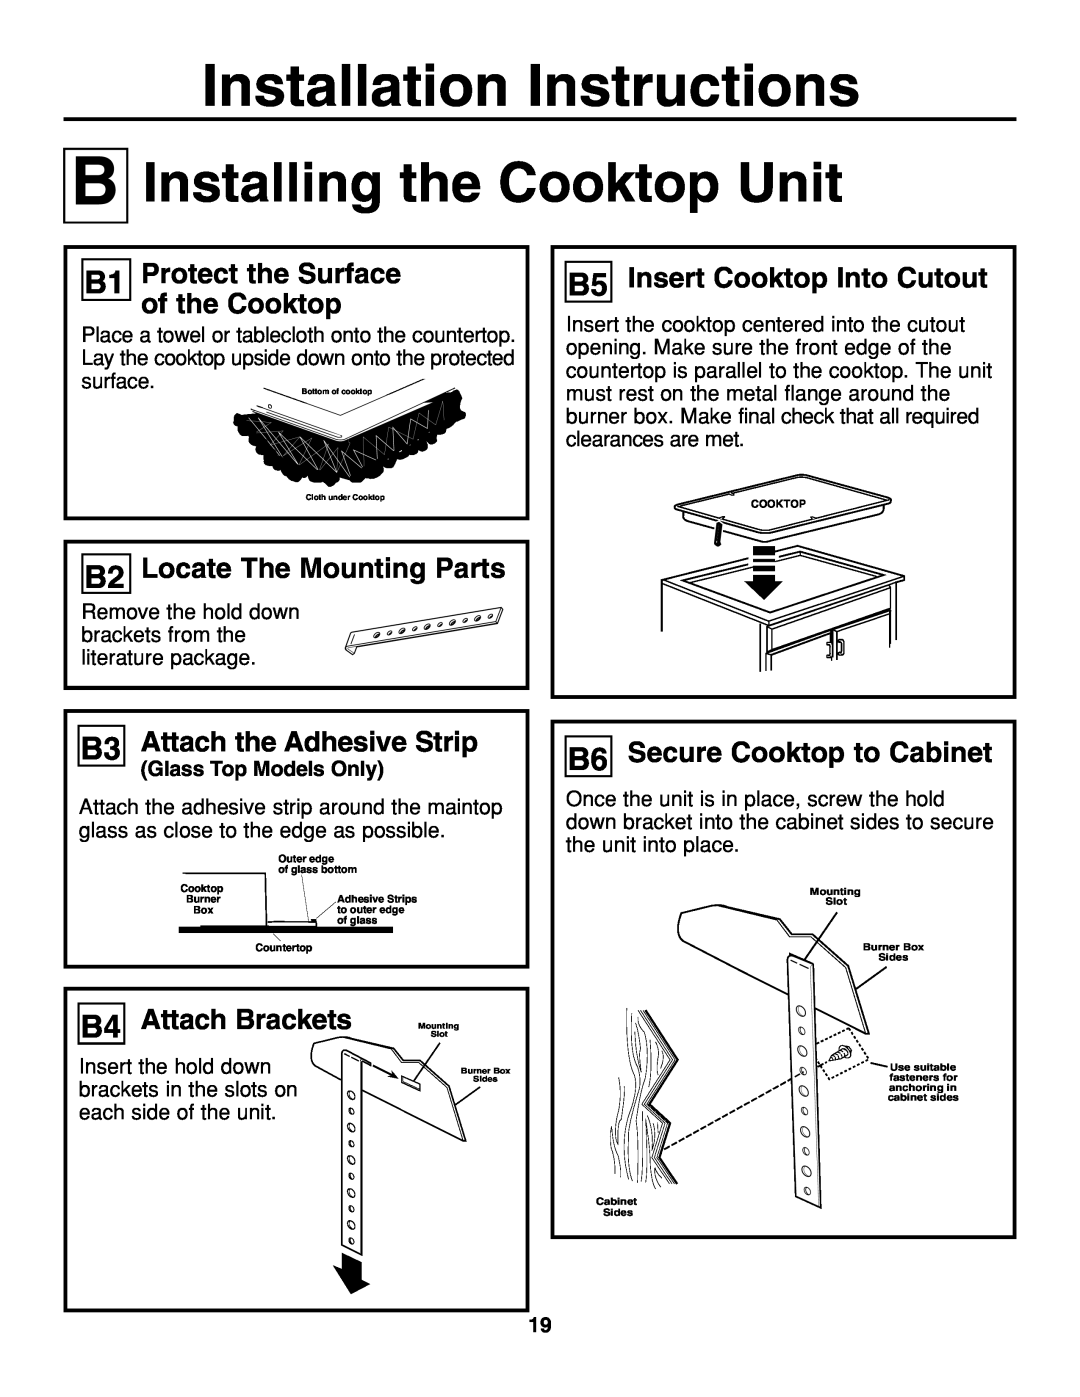 GE JGP637 Installing the Cooktop Unit, B1 Protect the Surface of the Cooktop, B2 Locate The Mounting Parts 